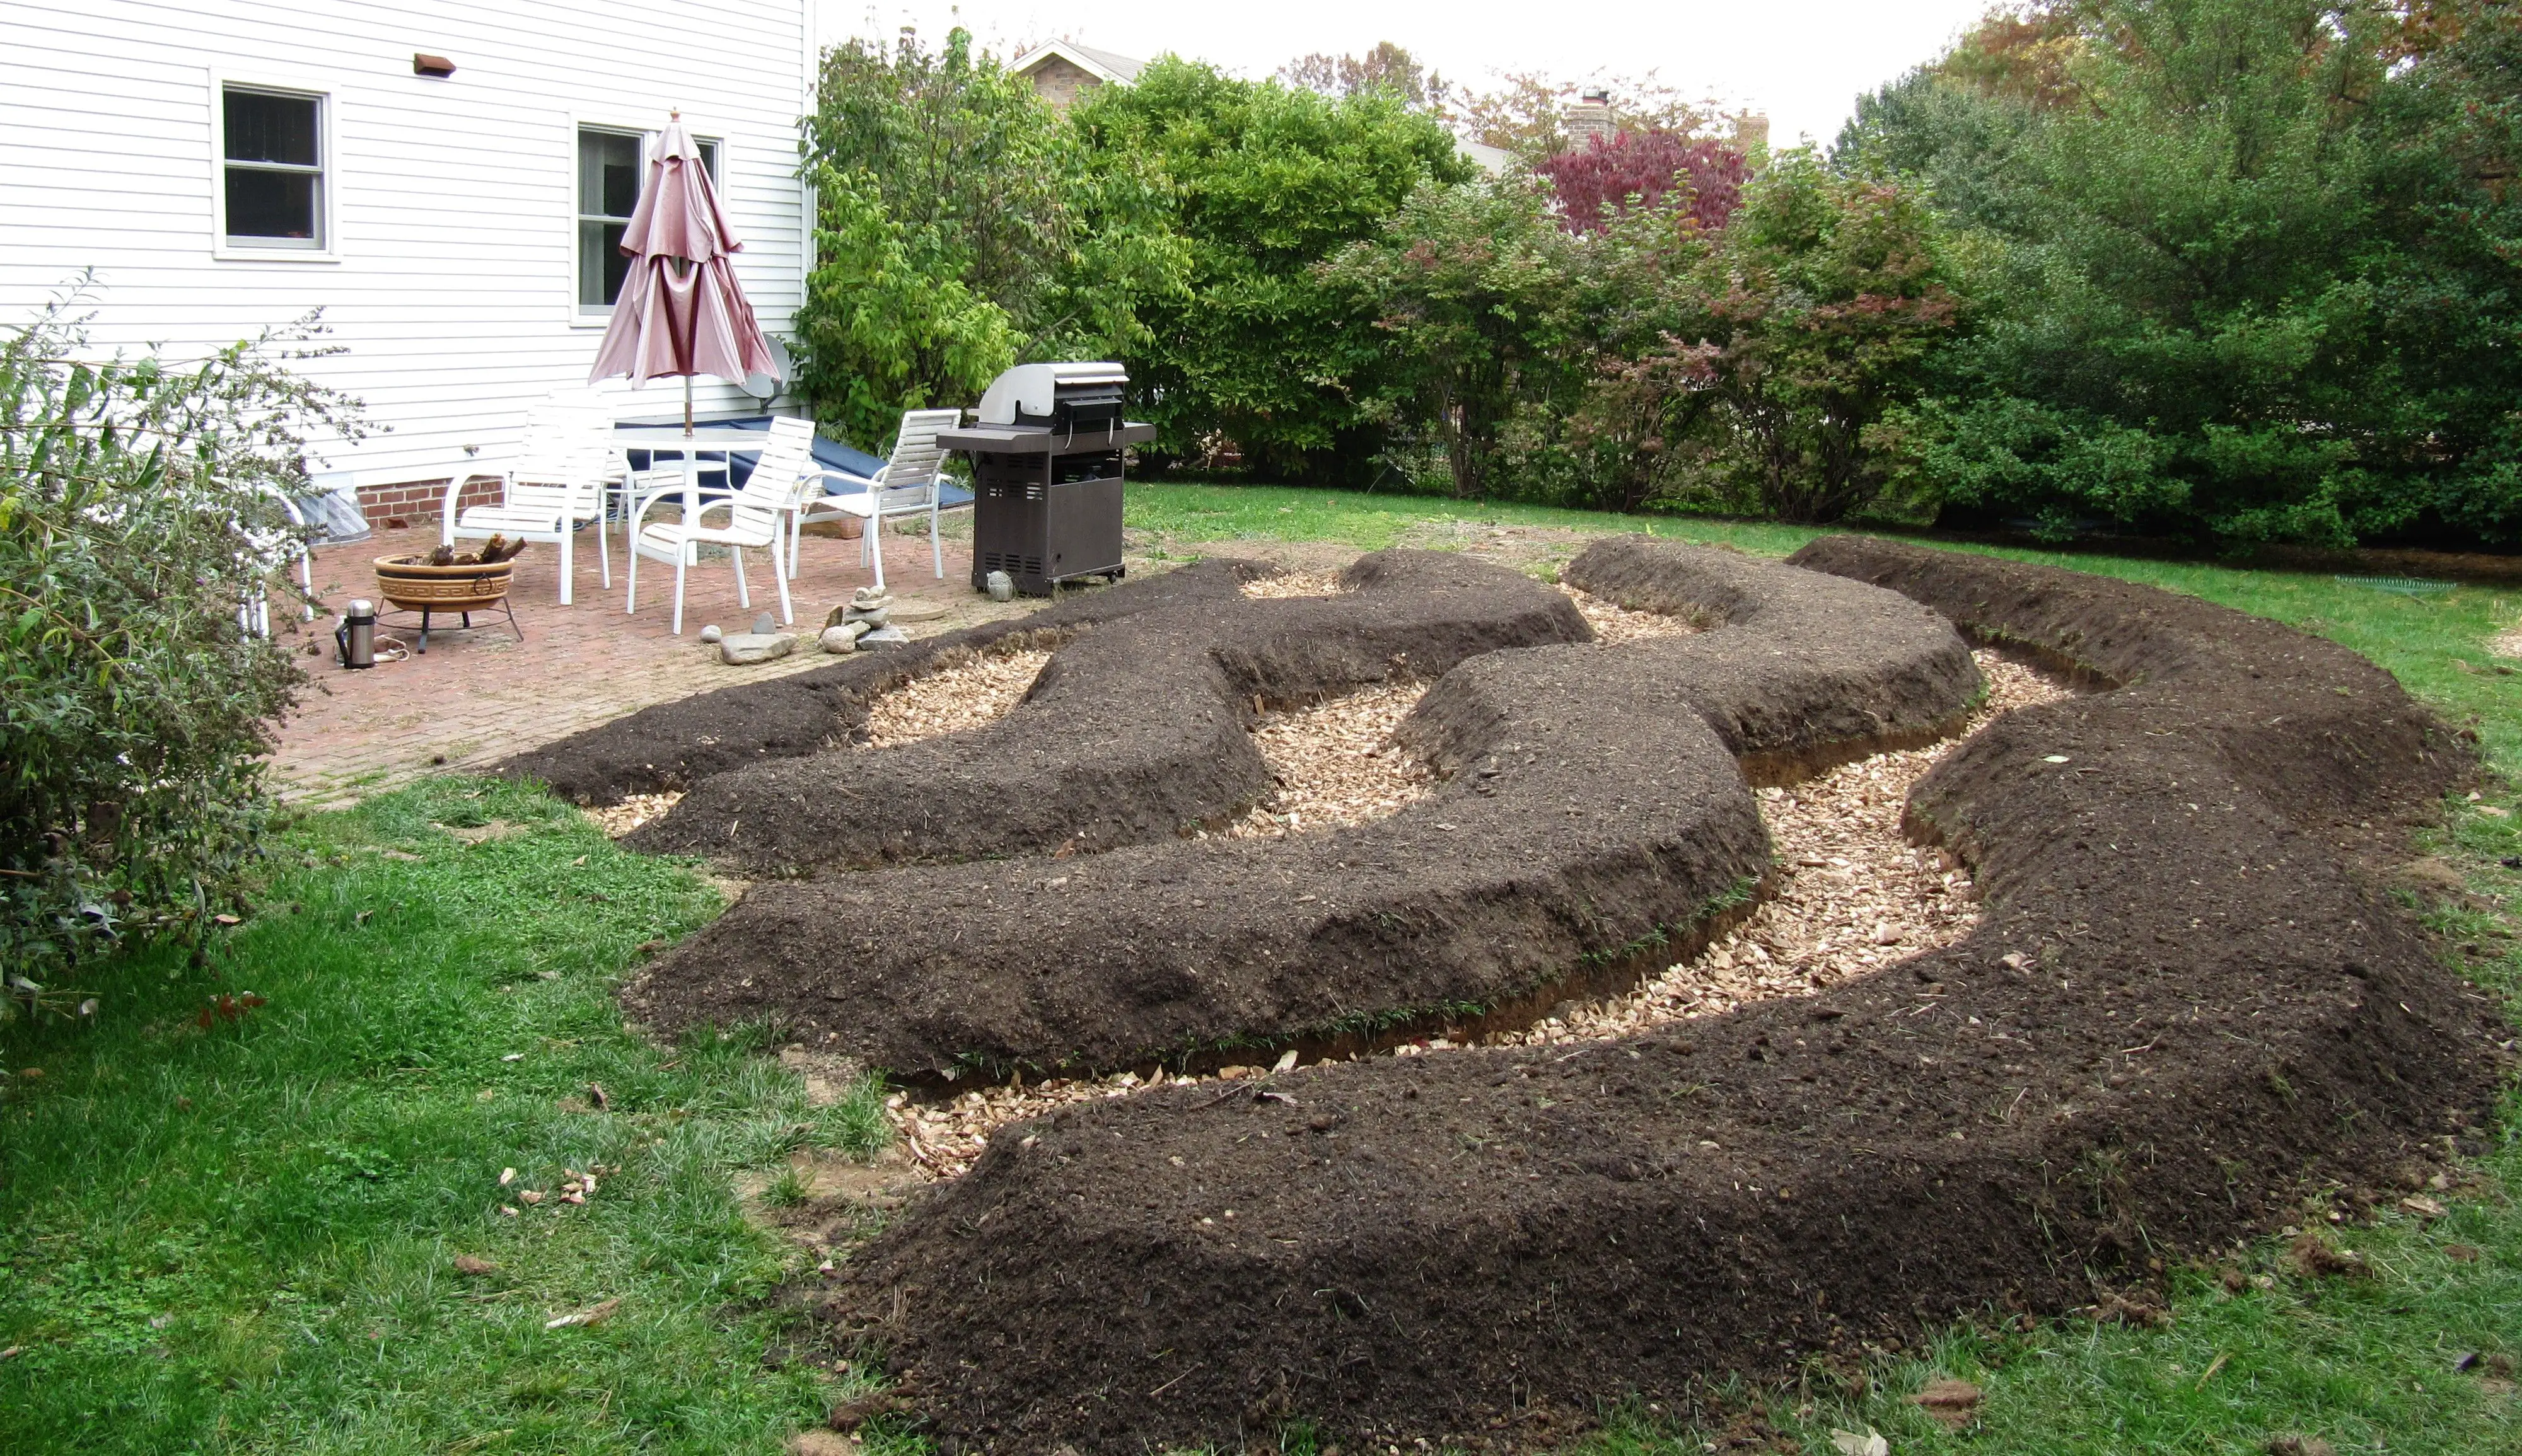 Contour beds for edible landscaping